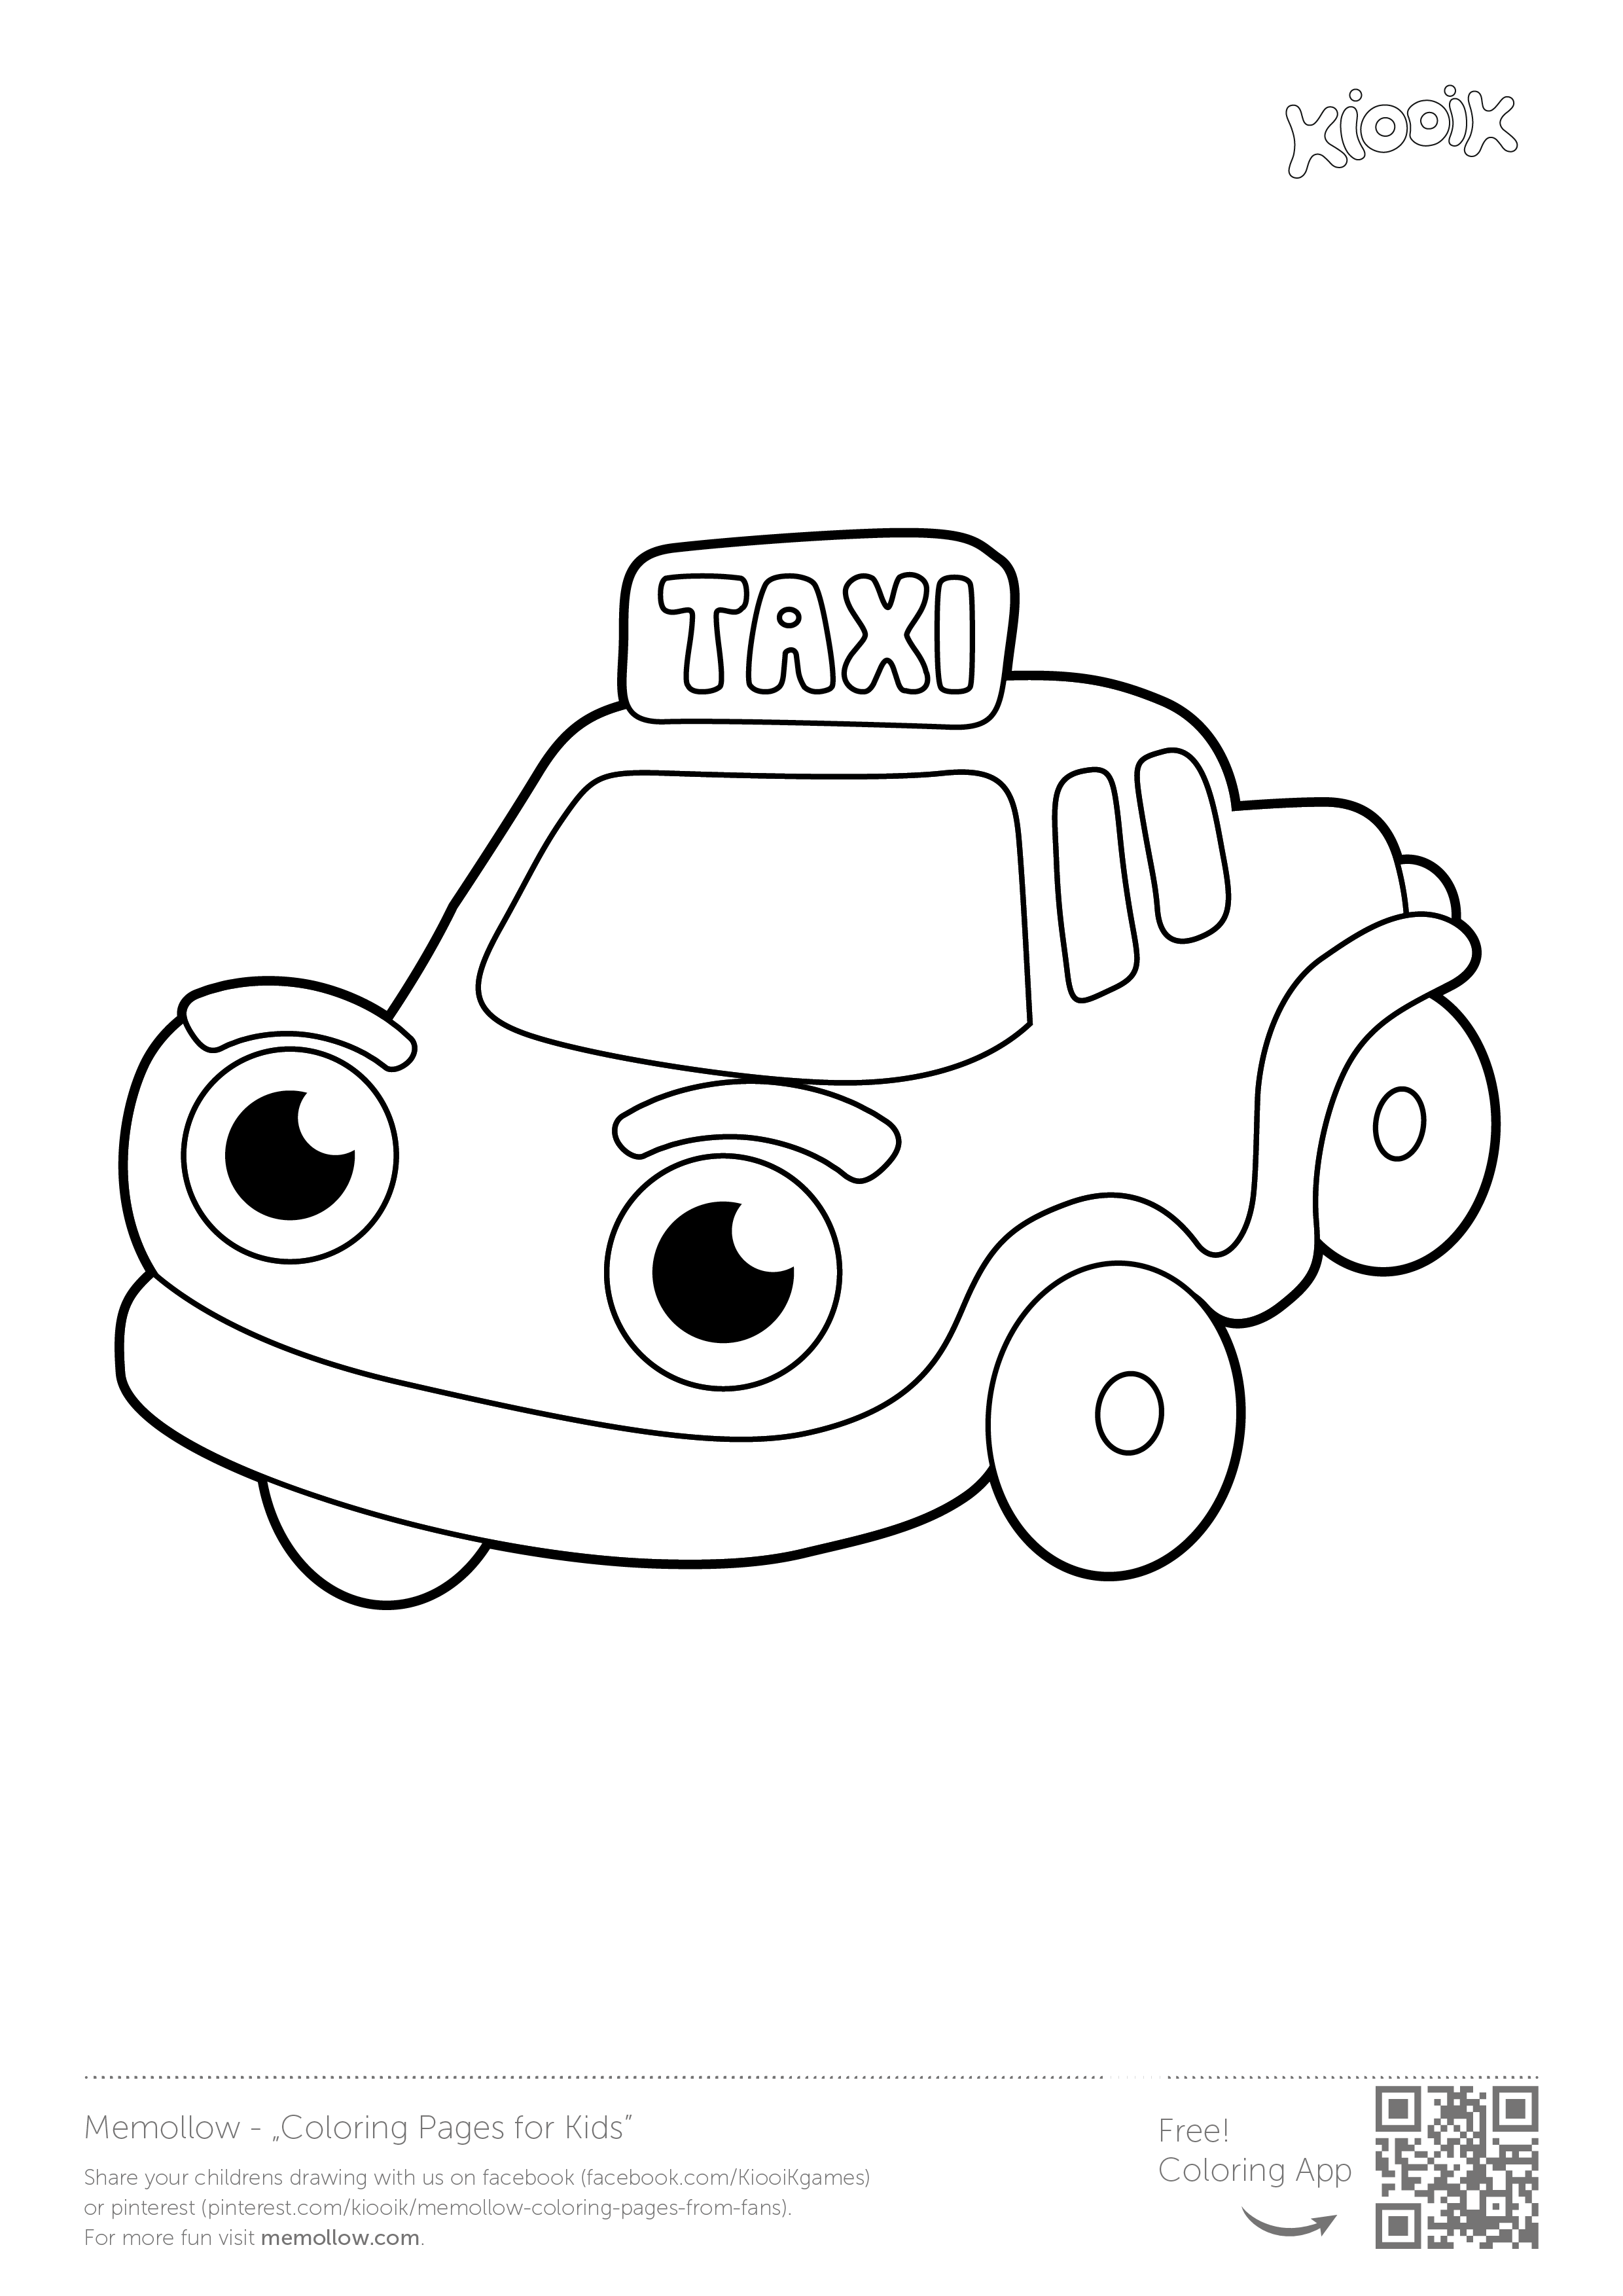 Taxi" #memollow to print #coloring pages for #kids printables ...